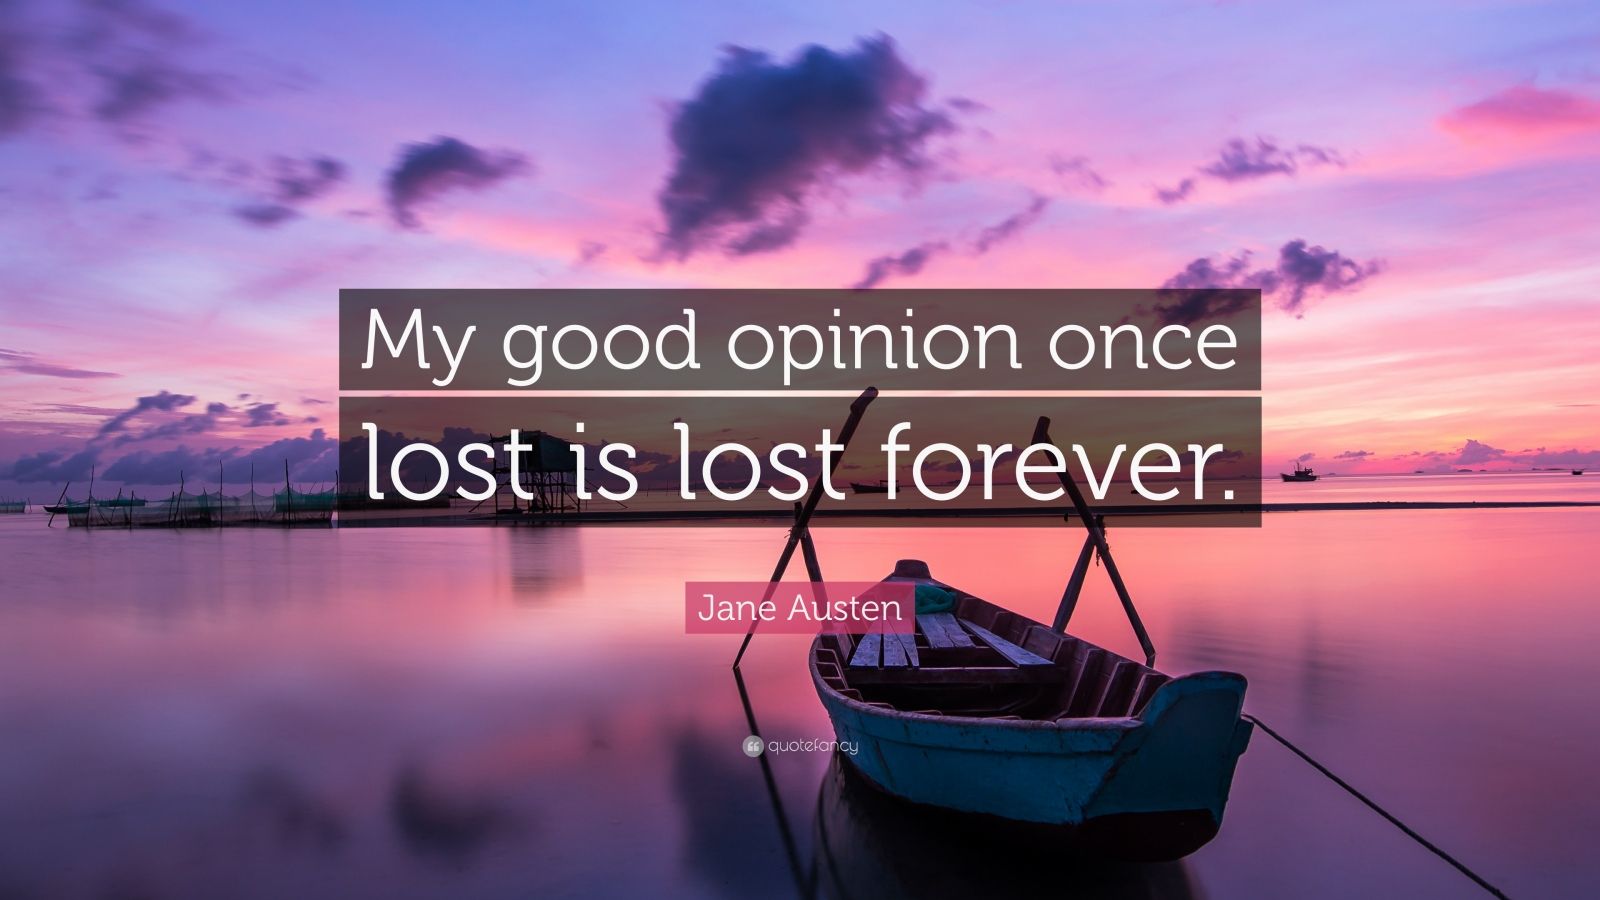 Jane Austen Quote: "My good opinion once lost is lost ...